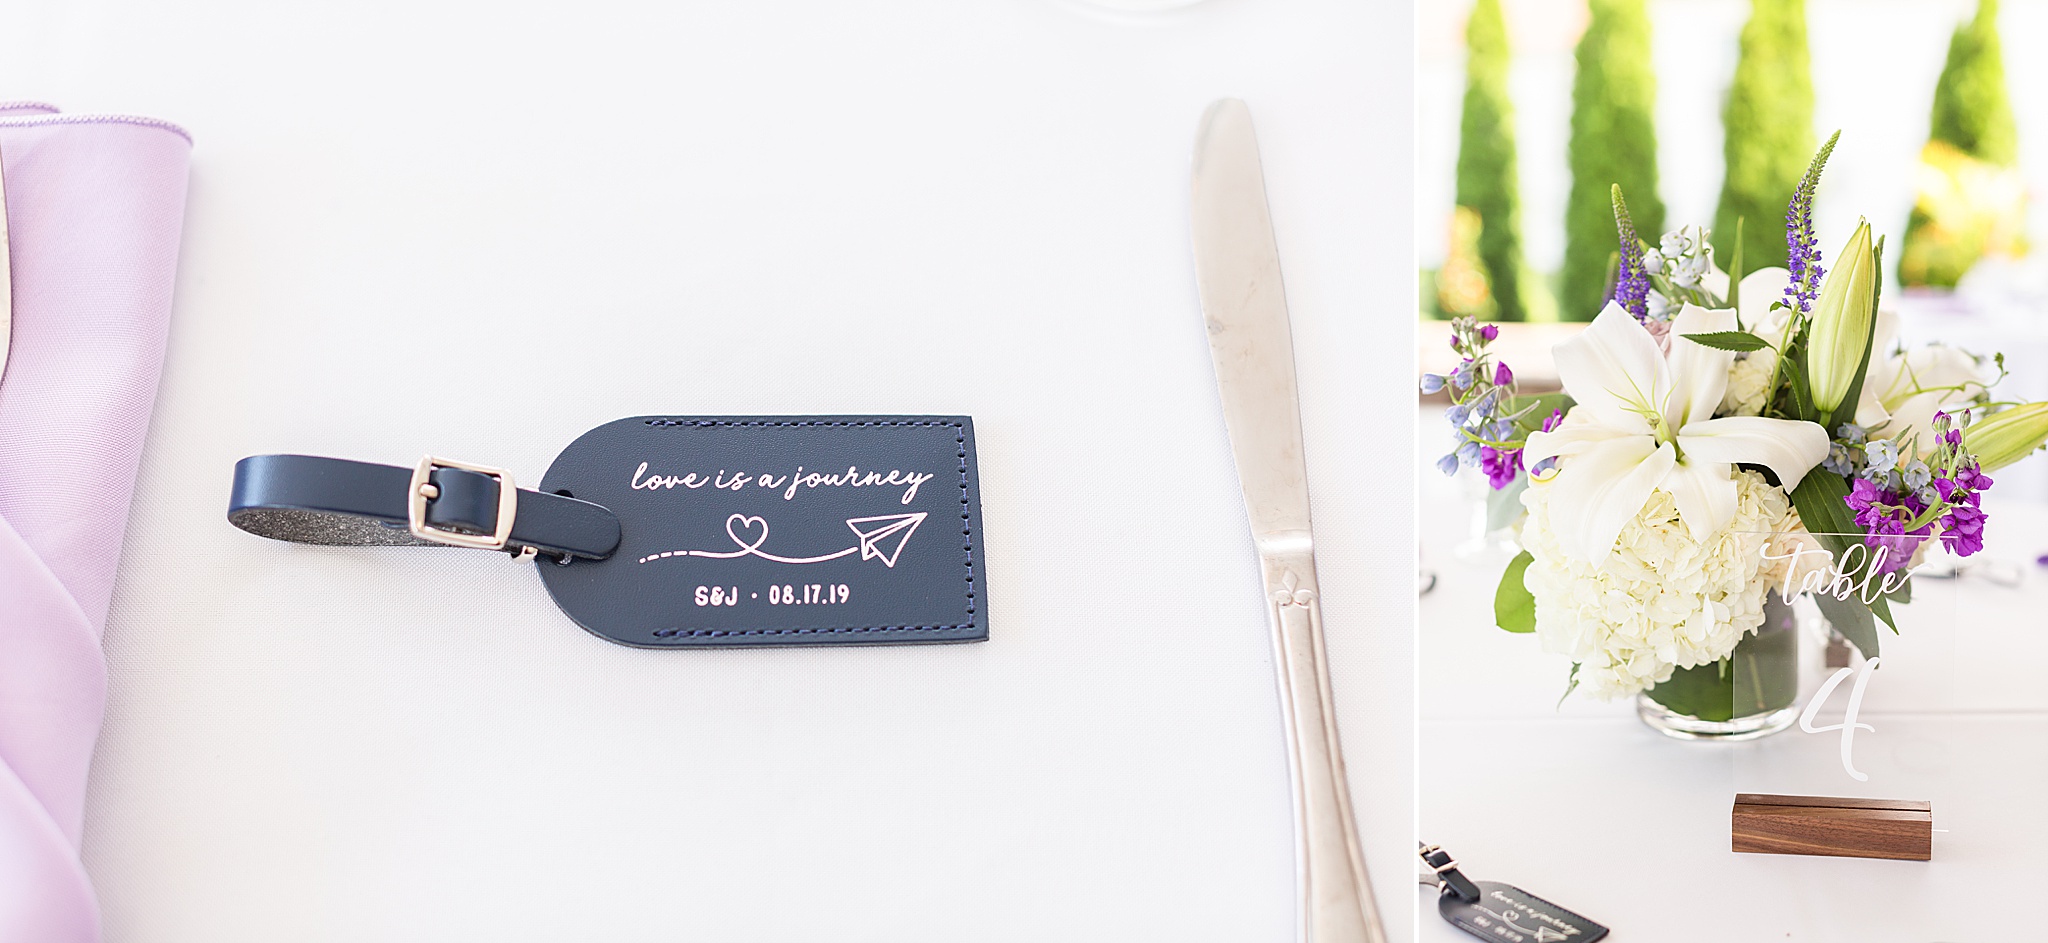 travel tag details photographed by Alexandra Mandato Photography